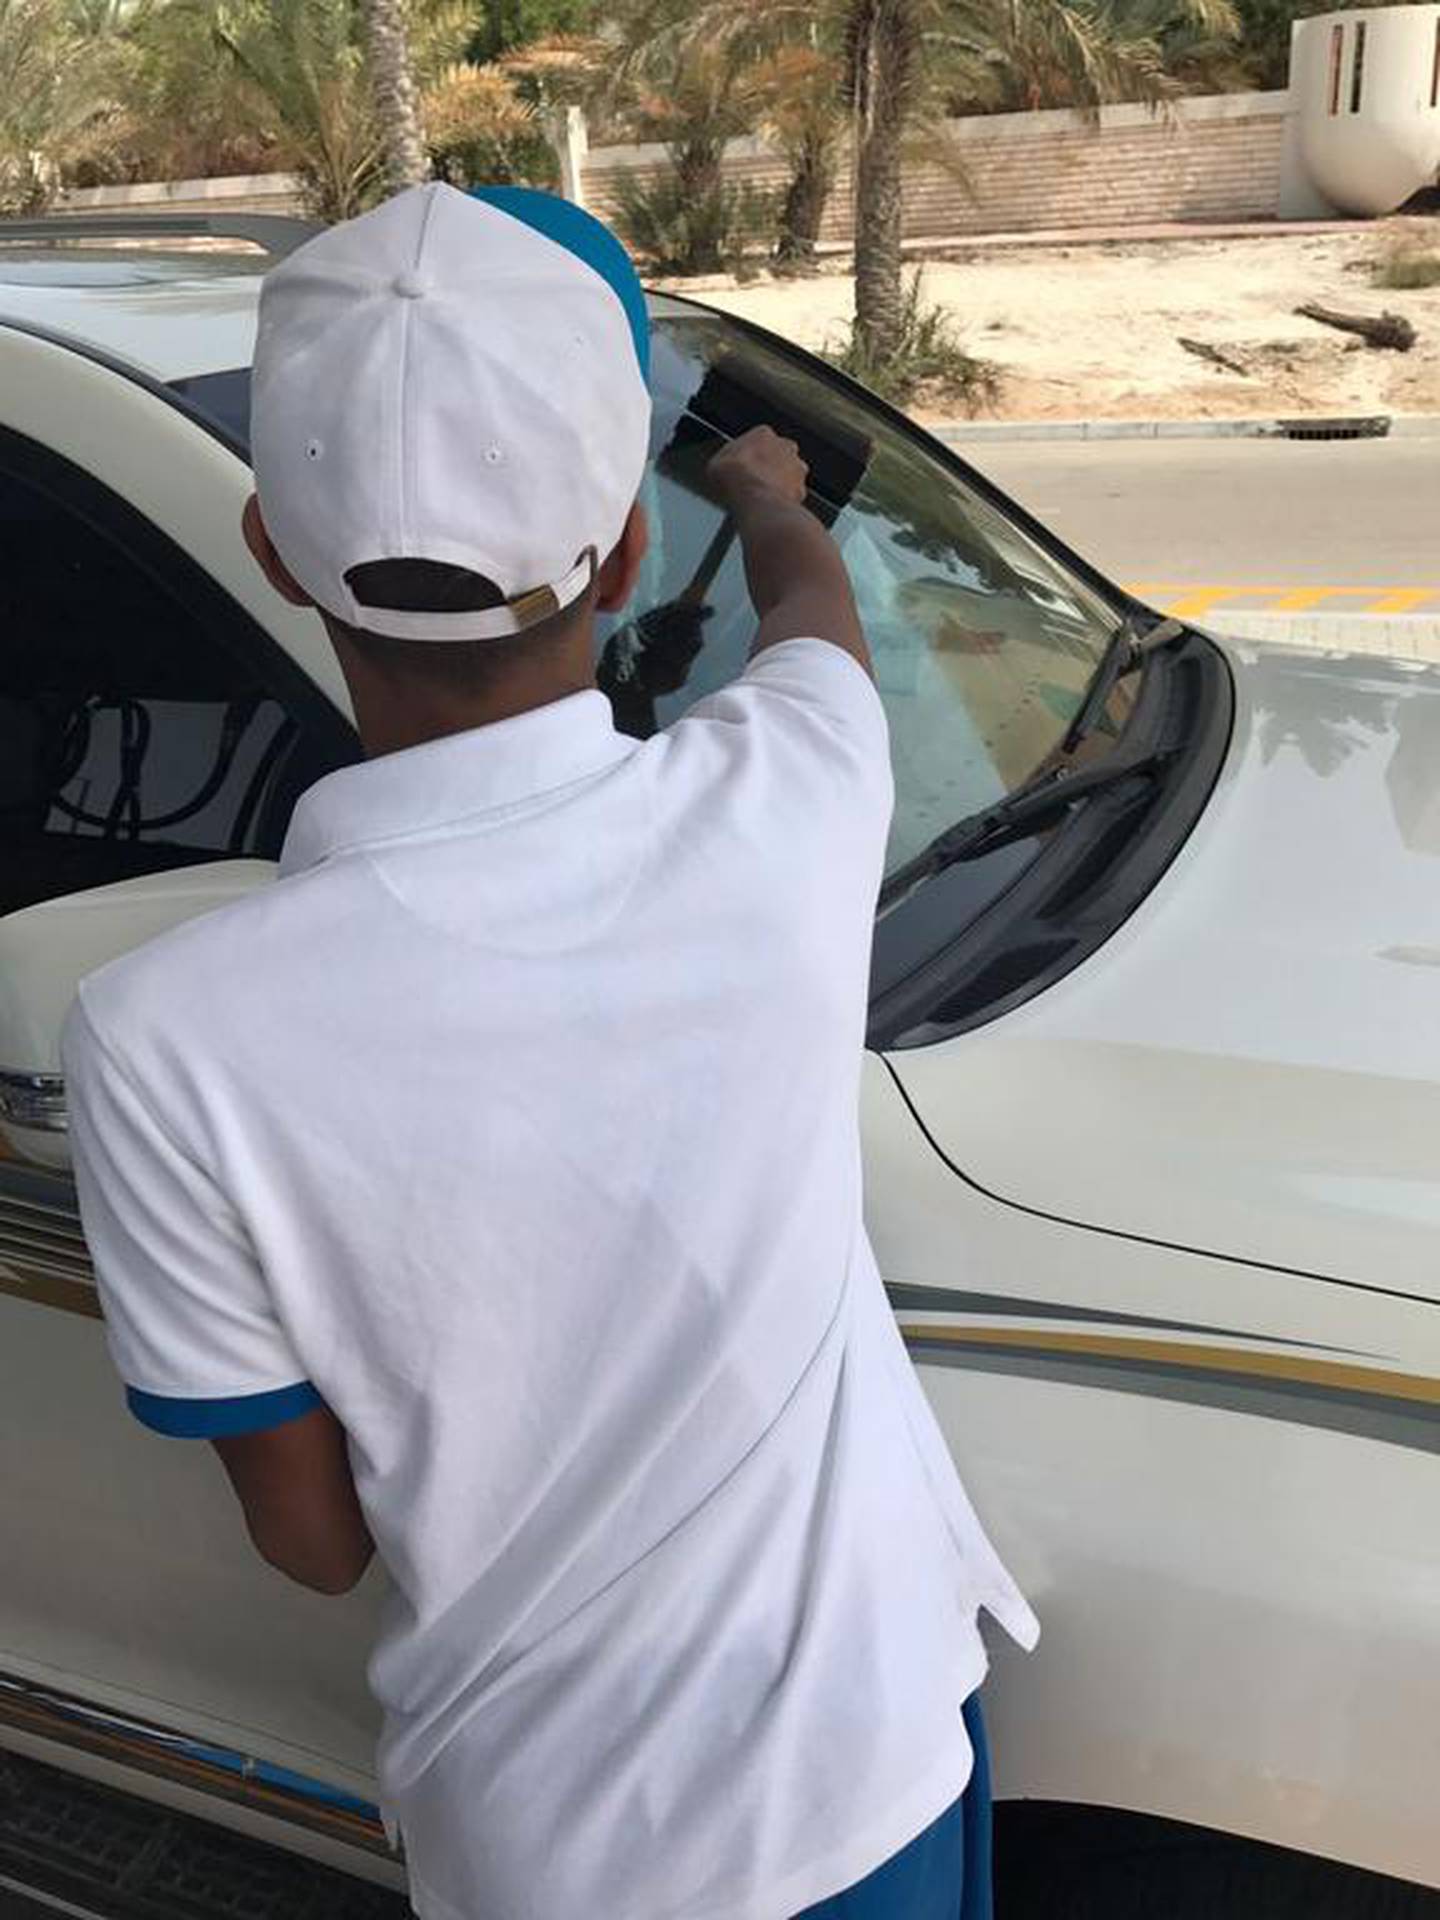 One man in Abu Dhabi served his community service for reckless driving at petrol station. Courtesy Abu Dhabi Judicial Department